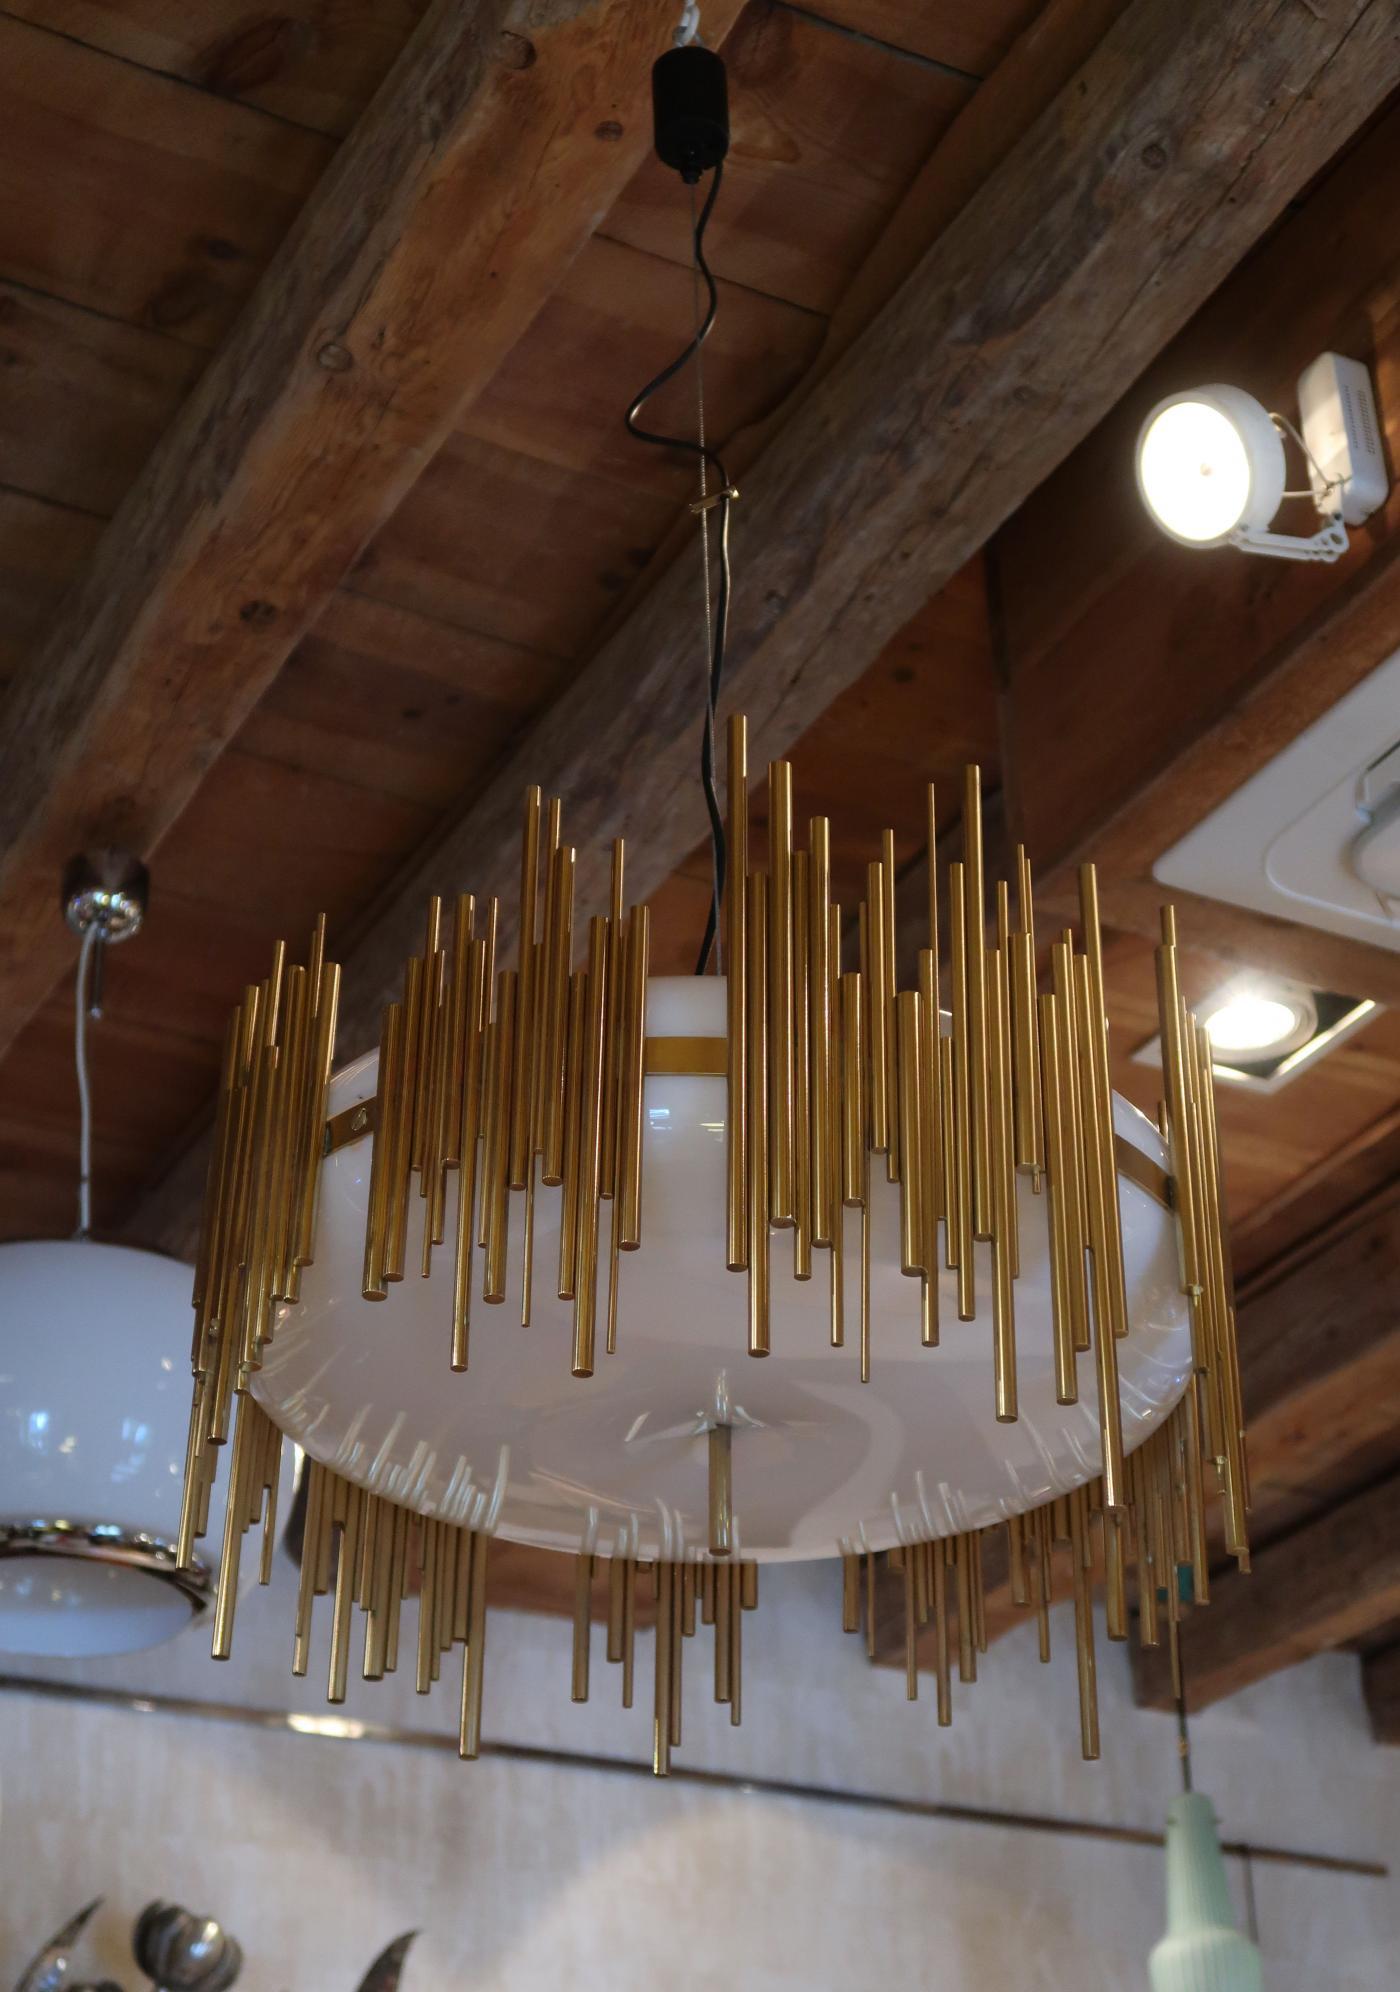 Candle, Perspex and Gilded Brass Midcentury Italian Ceiling Lamp 1970. Good condition.
          